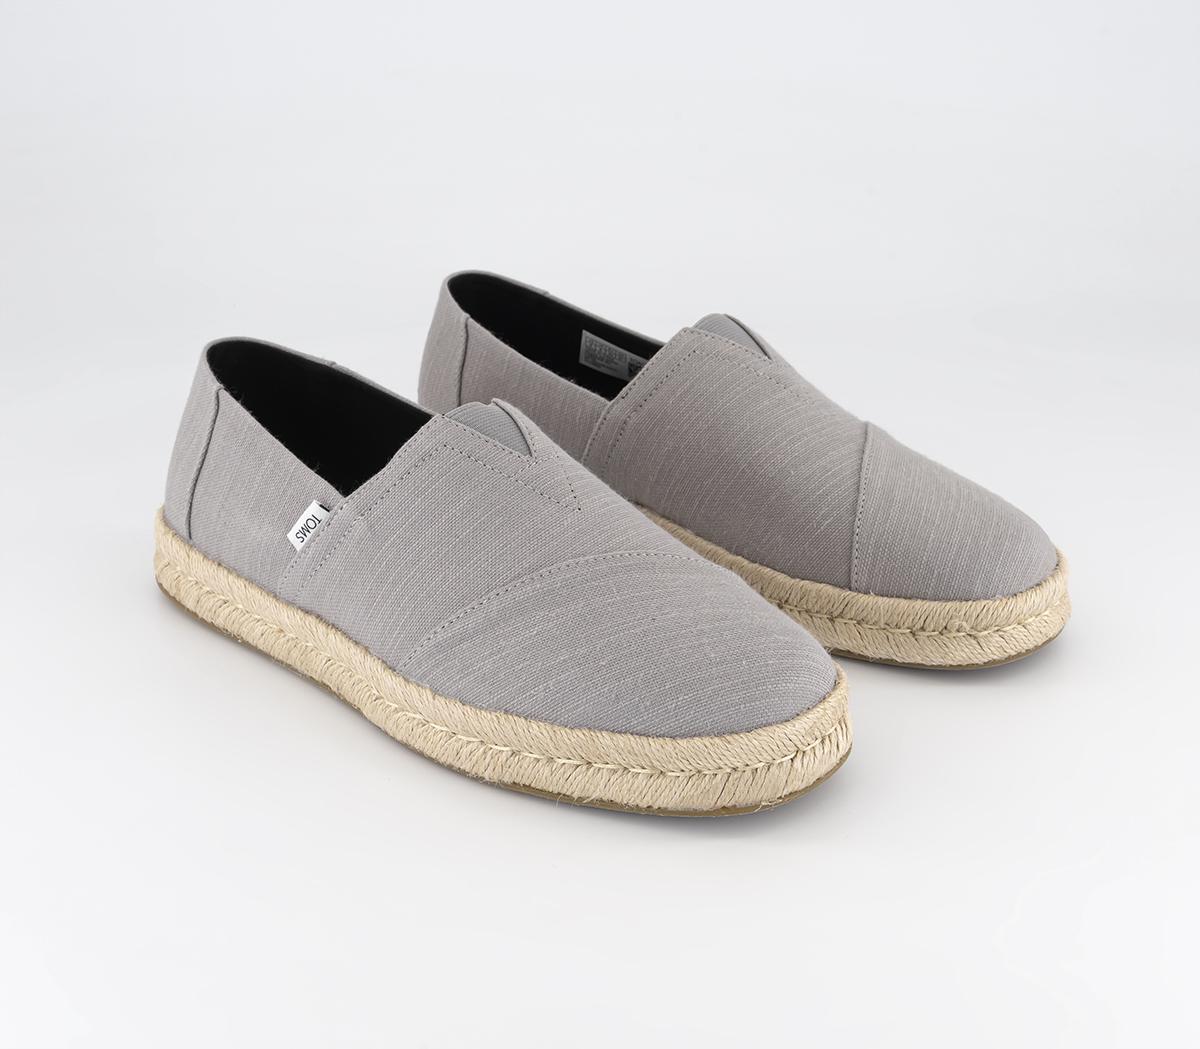 TOMS Mens Alpargata Rope 2.0 Slip Ons Drizzle Grey Recycled Cotton Slubby Woven, 9